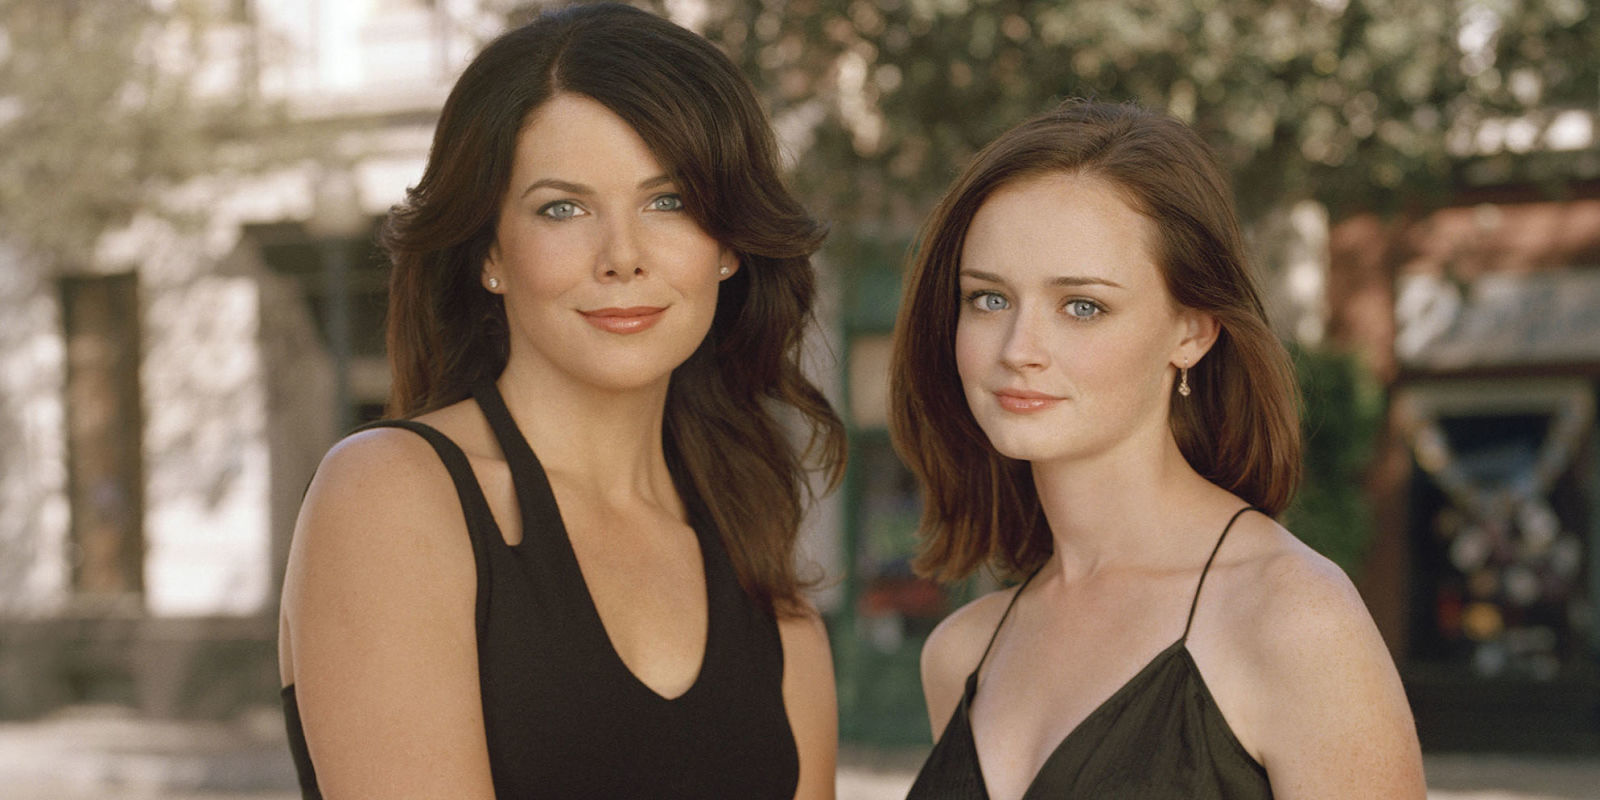 Gilmore Girls Backgrounds, Compatible - PC, Mobile, Gadgets| 1600x800 px